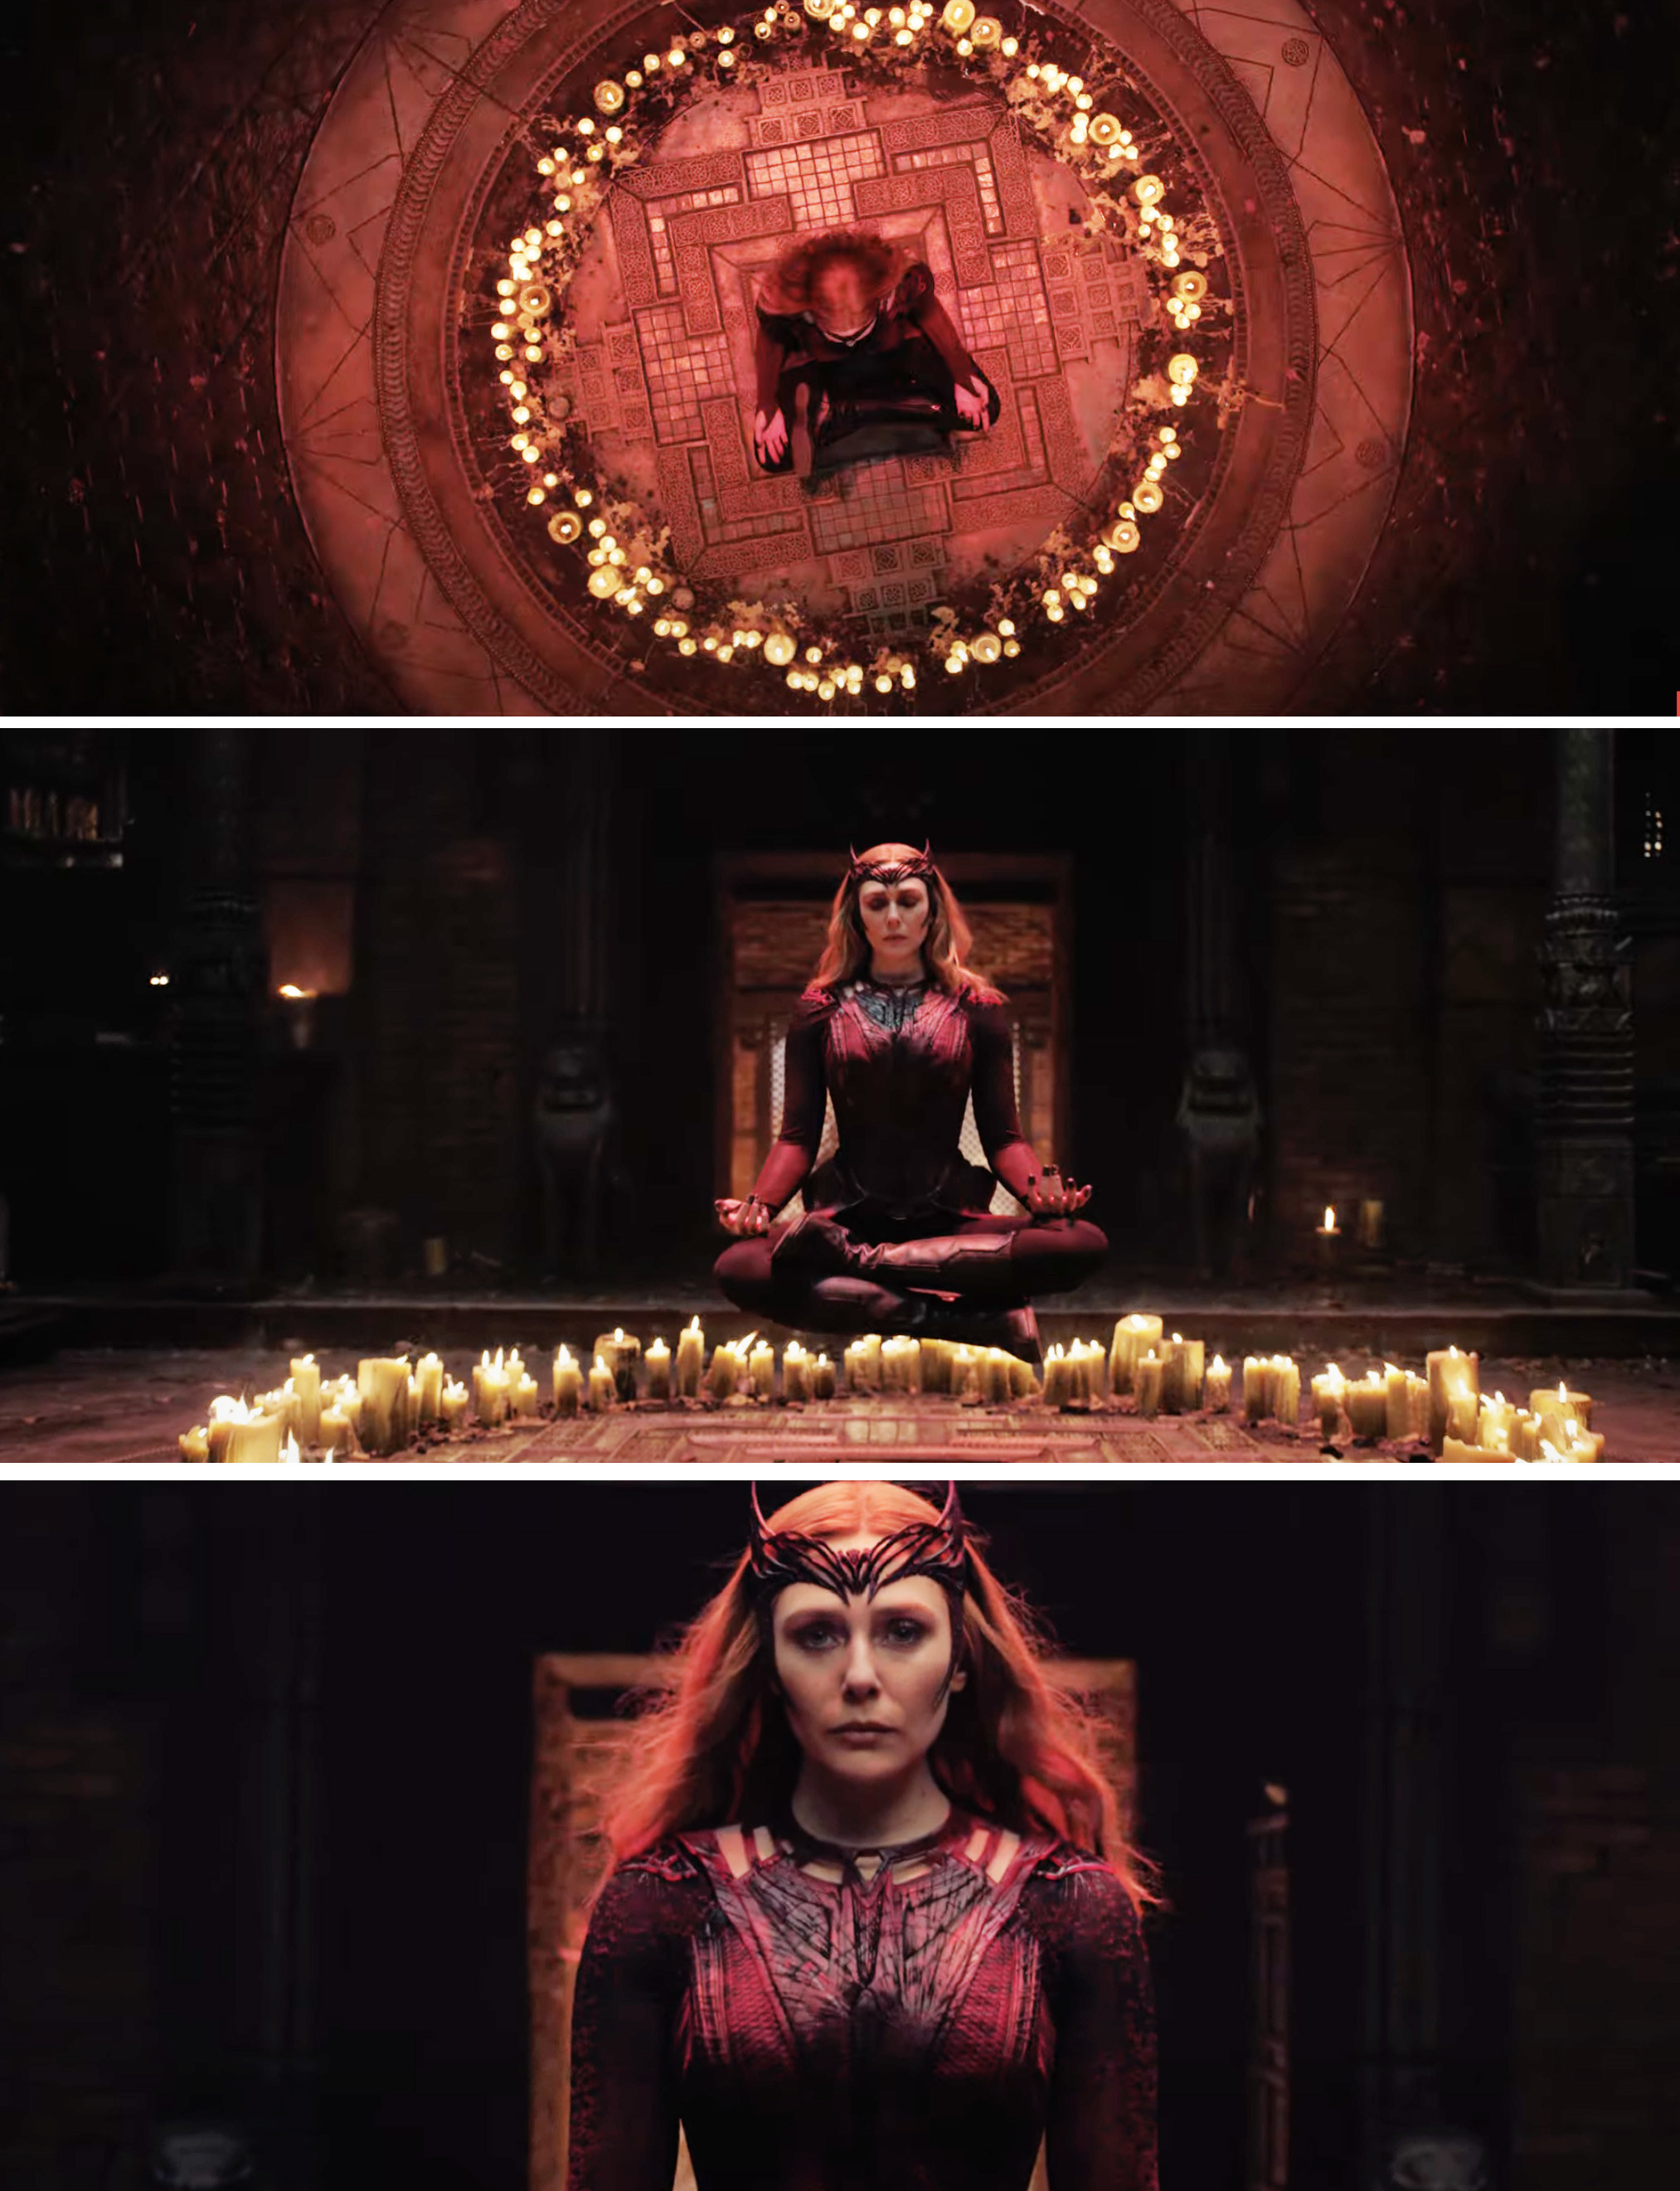 Wanda sitting cross-legged and levitating in the middle of a circle of lit candles